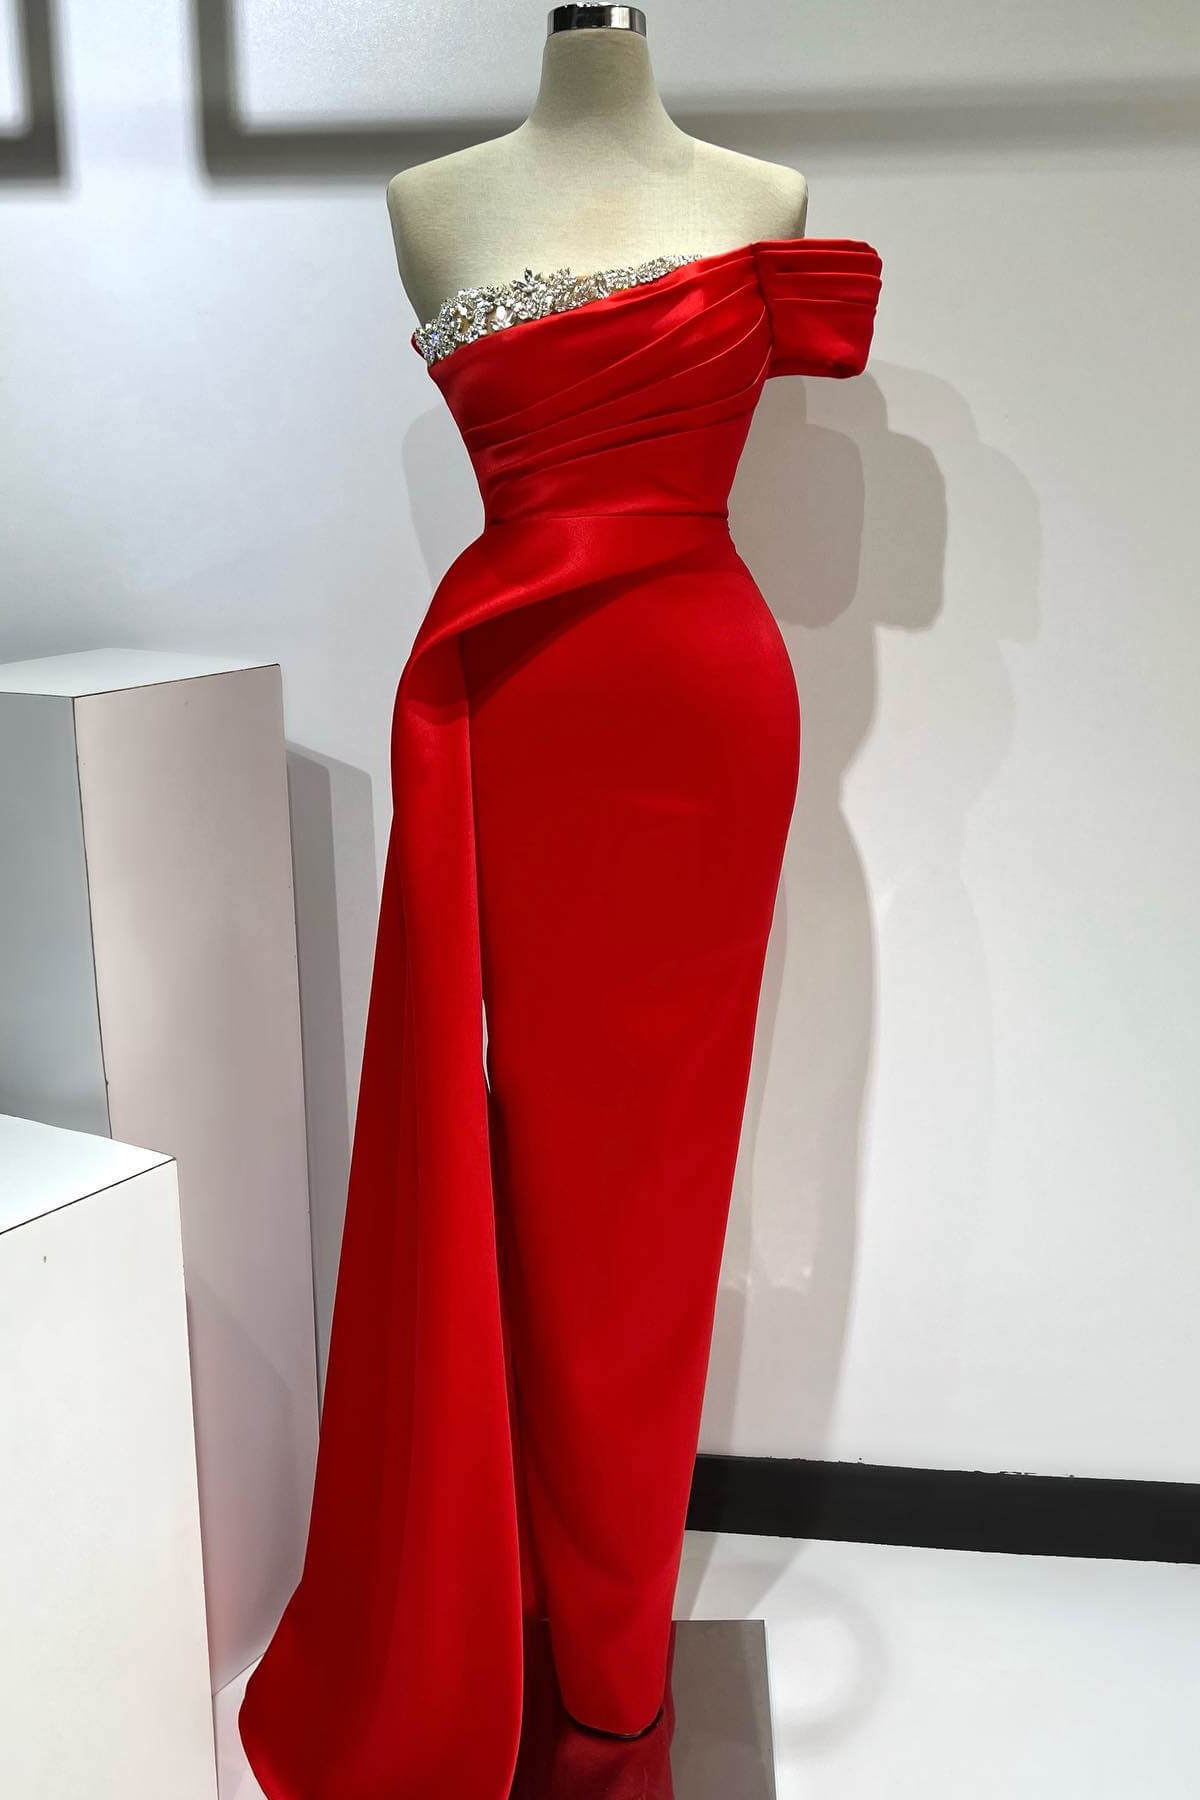 Chic Red One Shoulder Sleeveless Mermaid Evening Gown With Crystals Ruffles - lulusllly